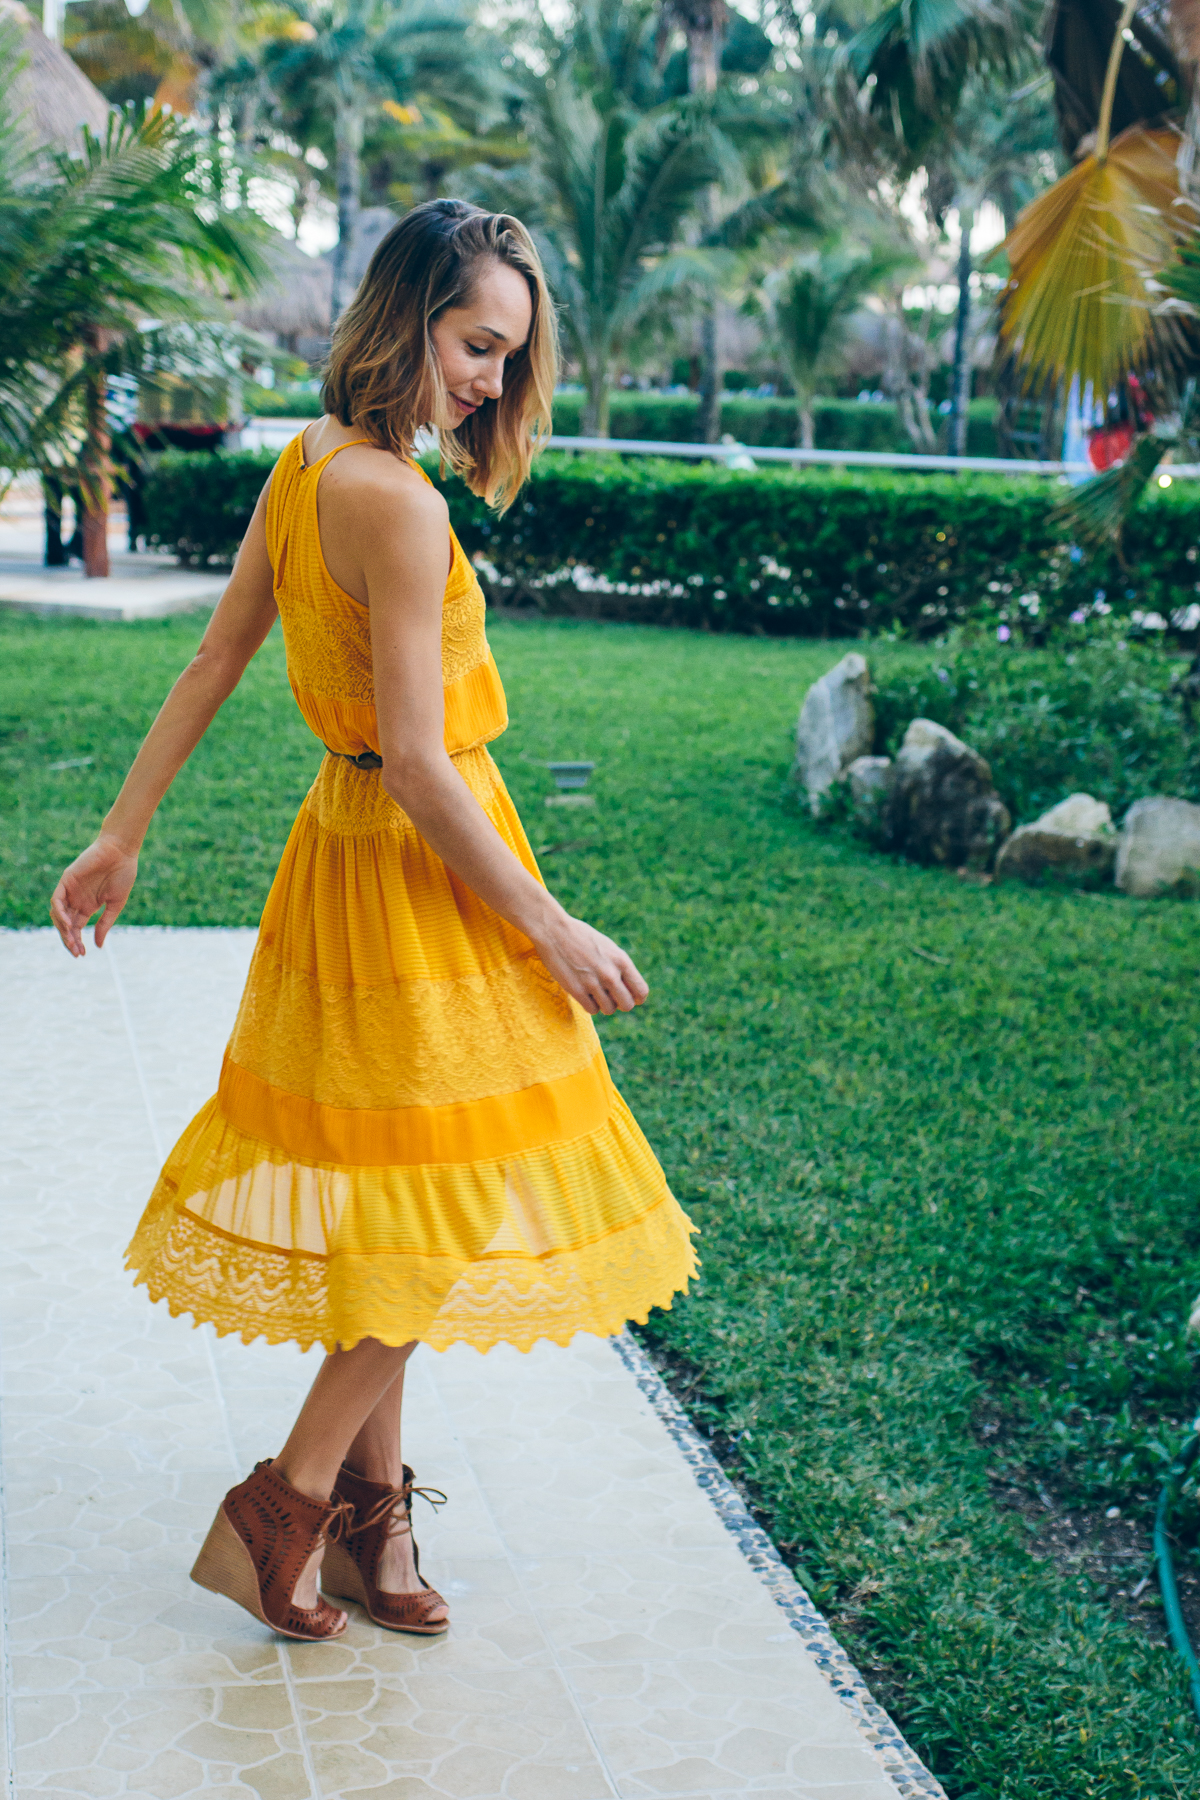 villanelle lace dress, anthropologie lace dress, yellow dress, spring outfit, blogger outfit, fashion blogger outfit — via @TheFoxandShe